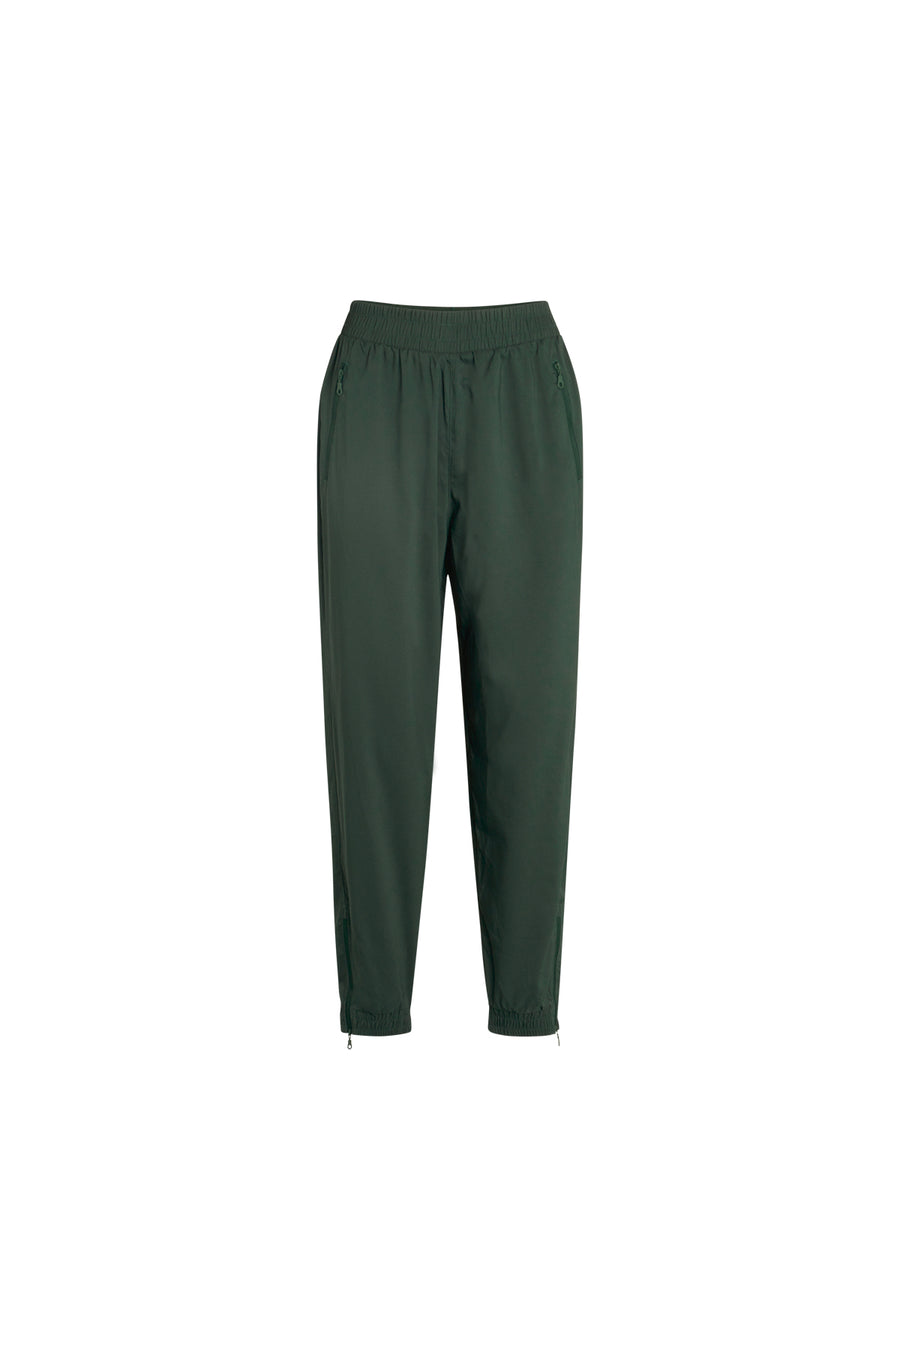 Summit recycled shell Track Pant, Girlfriend Collective – & Mother